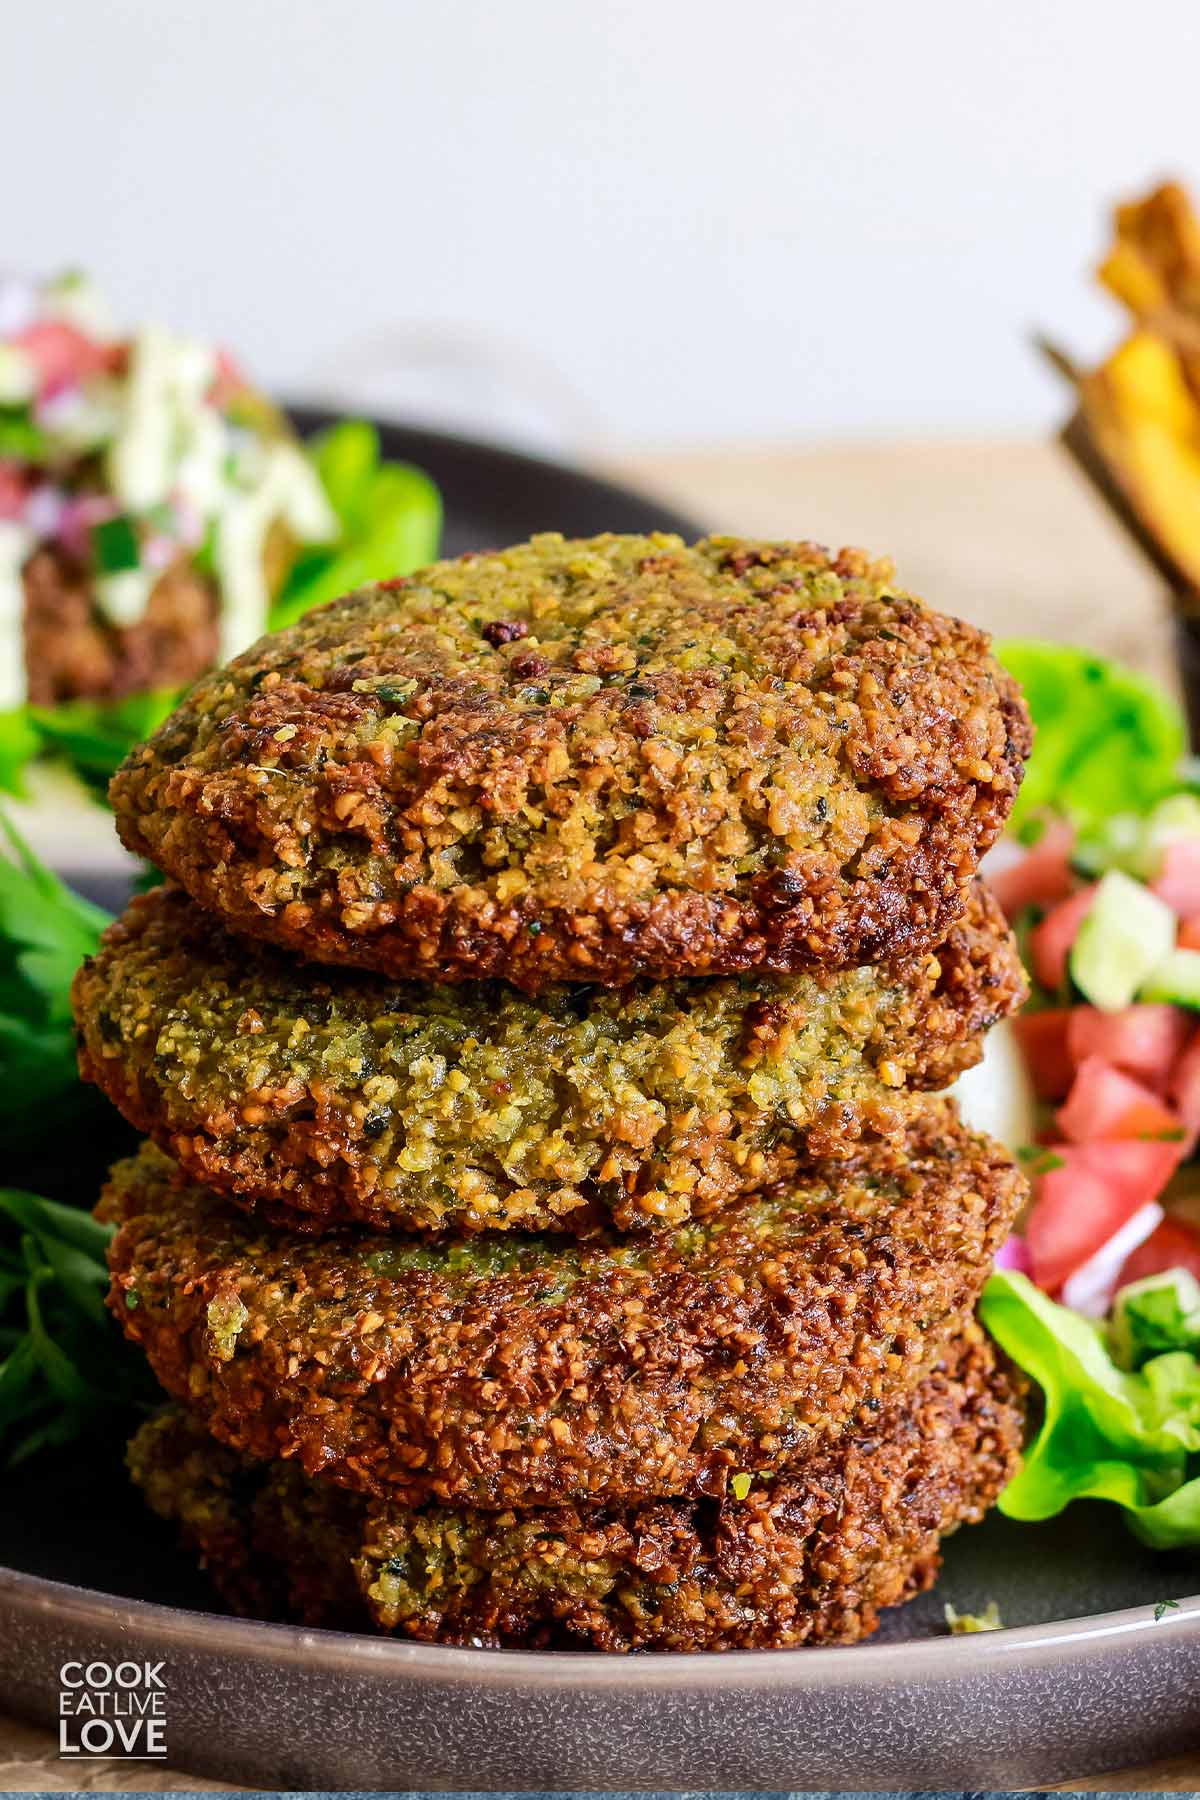 A stack of falafel burgers on a plate with some in the background.